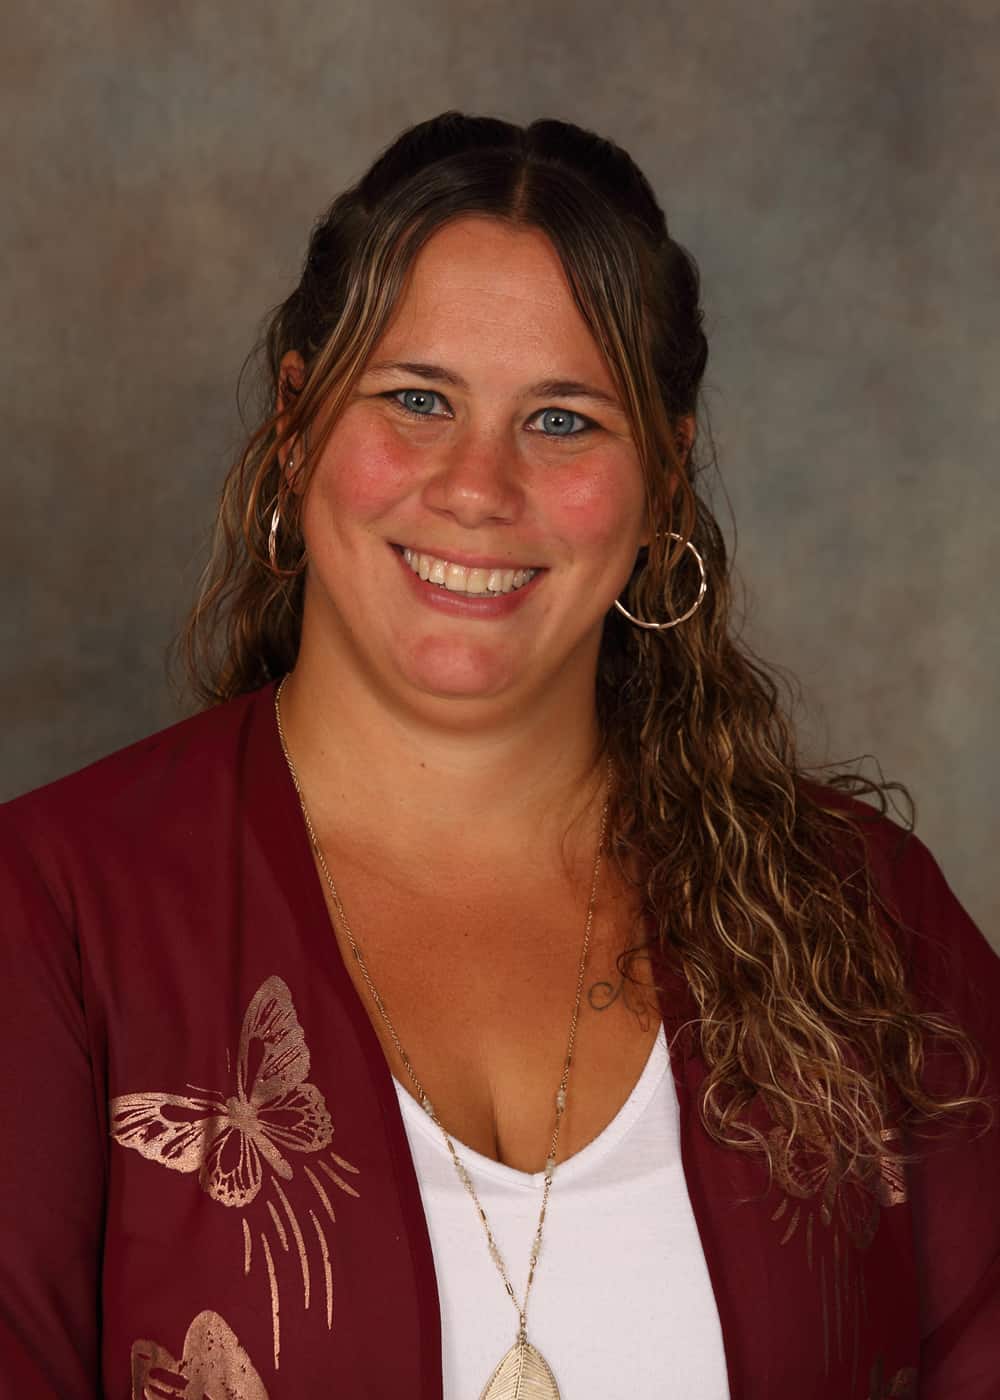 Photo of Lead Teacher Karrie Smith. She is a Caucasian woman with long brown hair, blue eyes, a bright smile and hoop earrings. She is wearing a white shirt and a dark red blouse with silver butterfly decorations.